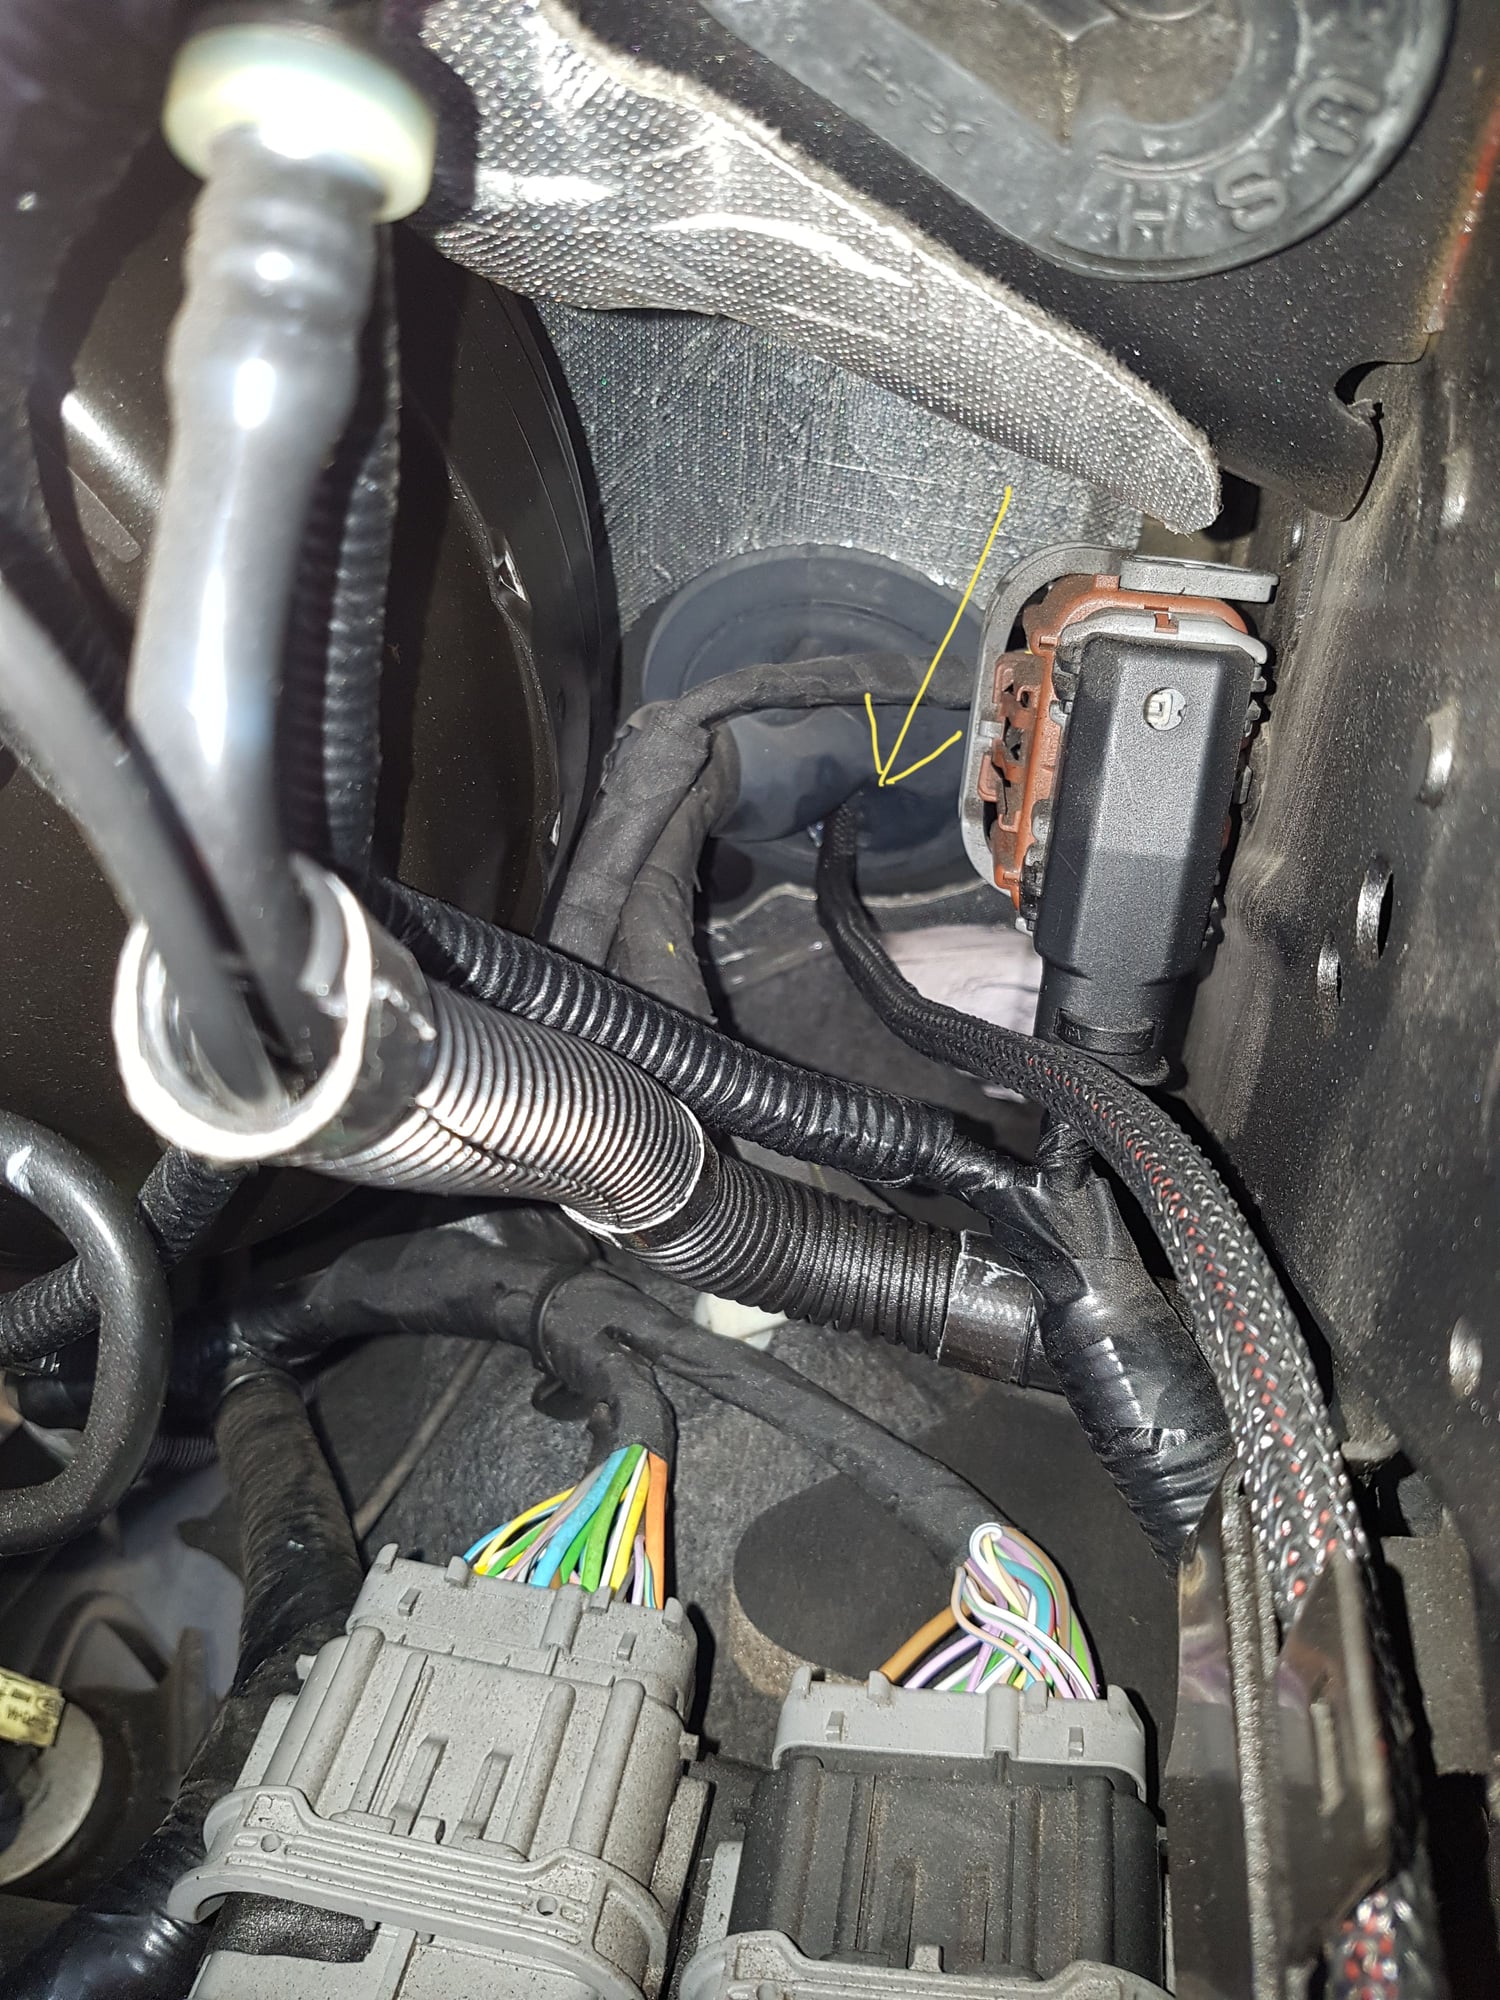 Western plow wiring/mount - Page 3 - Ford Truck Enthusiasts Forums